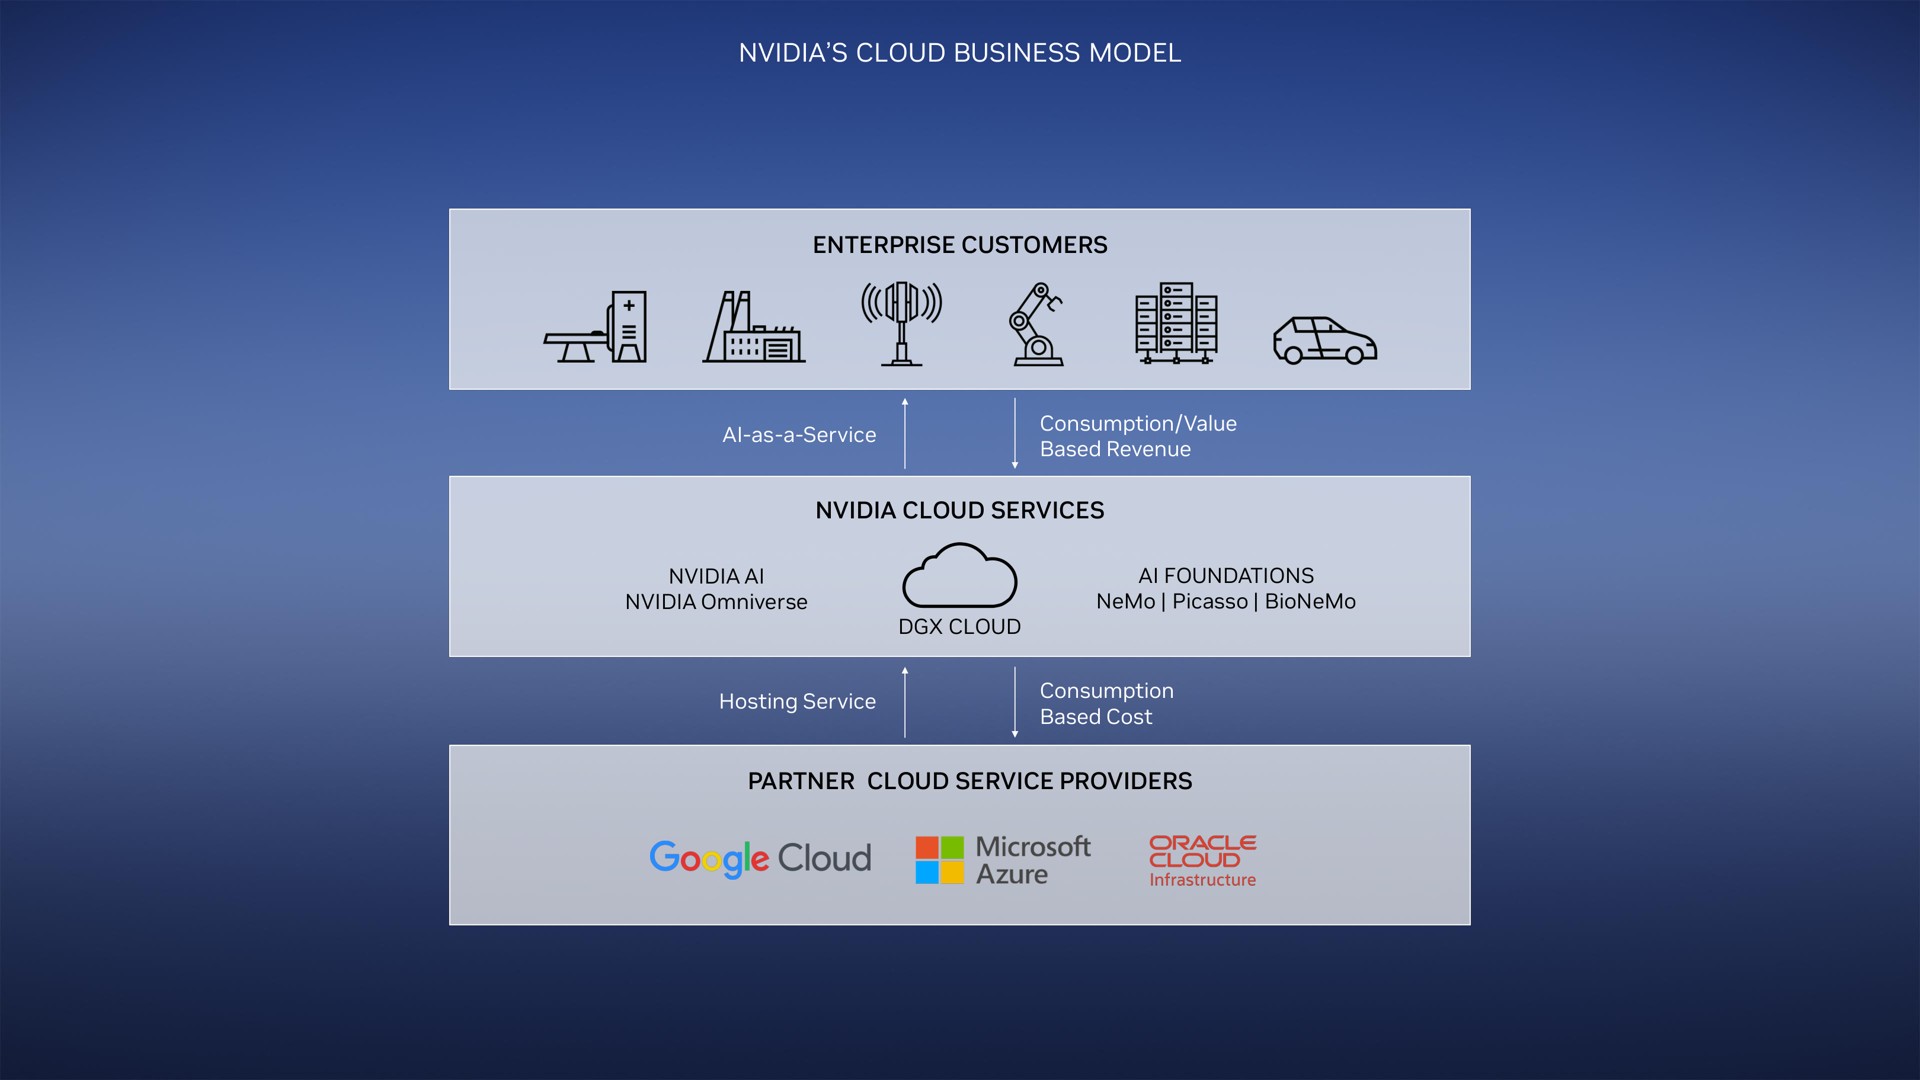 cloud business model as a services partner service providers azure oracle infrastructure | NVIDIA